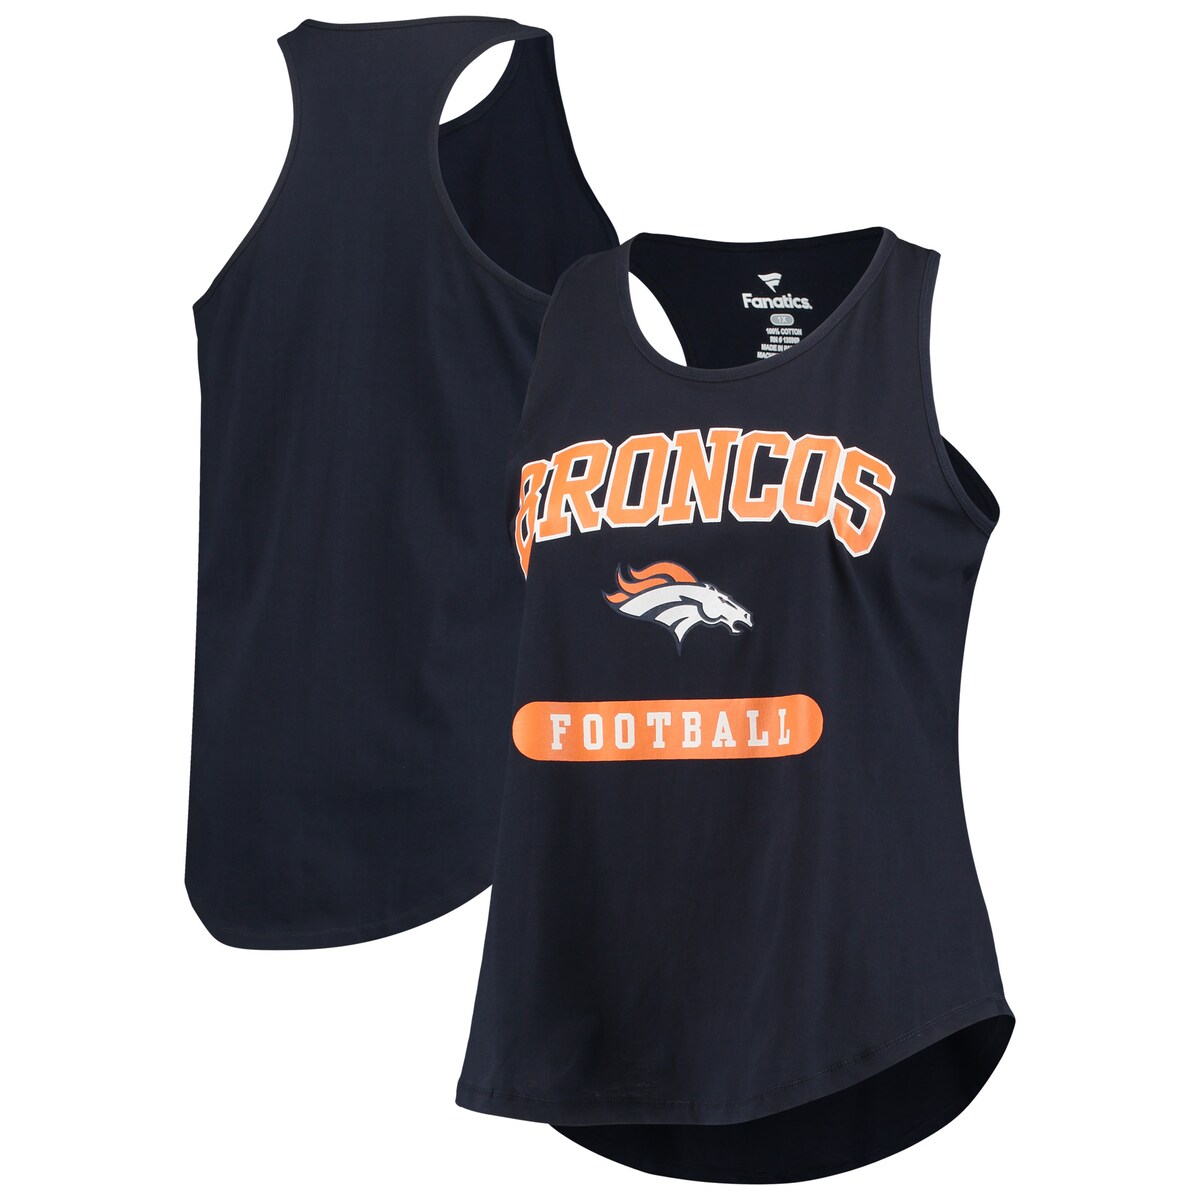 Show off your unwavering Denver Broncos pride in sporty style when you grab this Ringer Racerback tank top. It features vibrant team graphics that enhance your love for the squad. Perfect for warmer weather or working out, it offers a sleeveless design and ultra-soft fabric, making this top a great addition to your Denver Broncos game day gear.Scoop neckMachine wash, tumble dry lowOfficially licensedBrand: Fanatics BrandedRounded droptail hemSleevelessImportedScreen print graphicsMaterial: 100% CottonRacerback